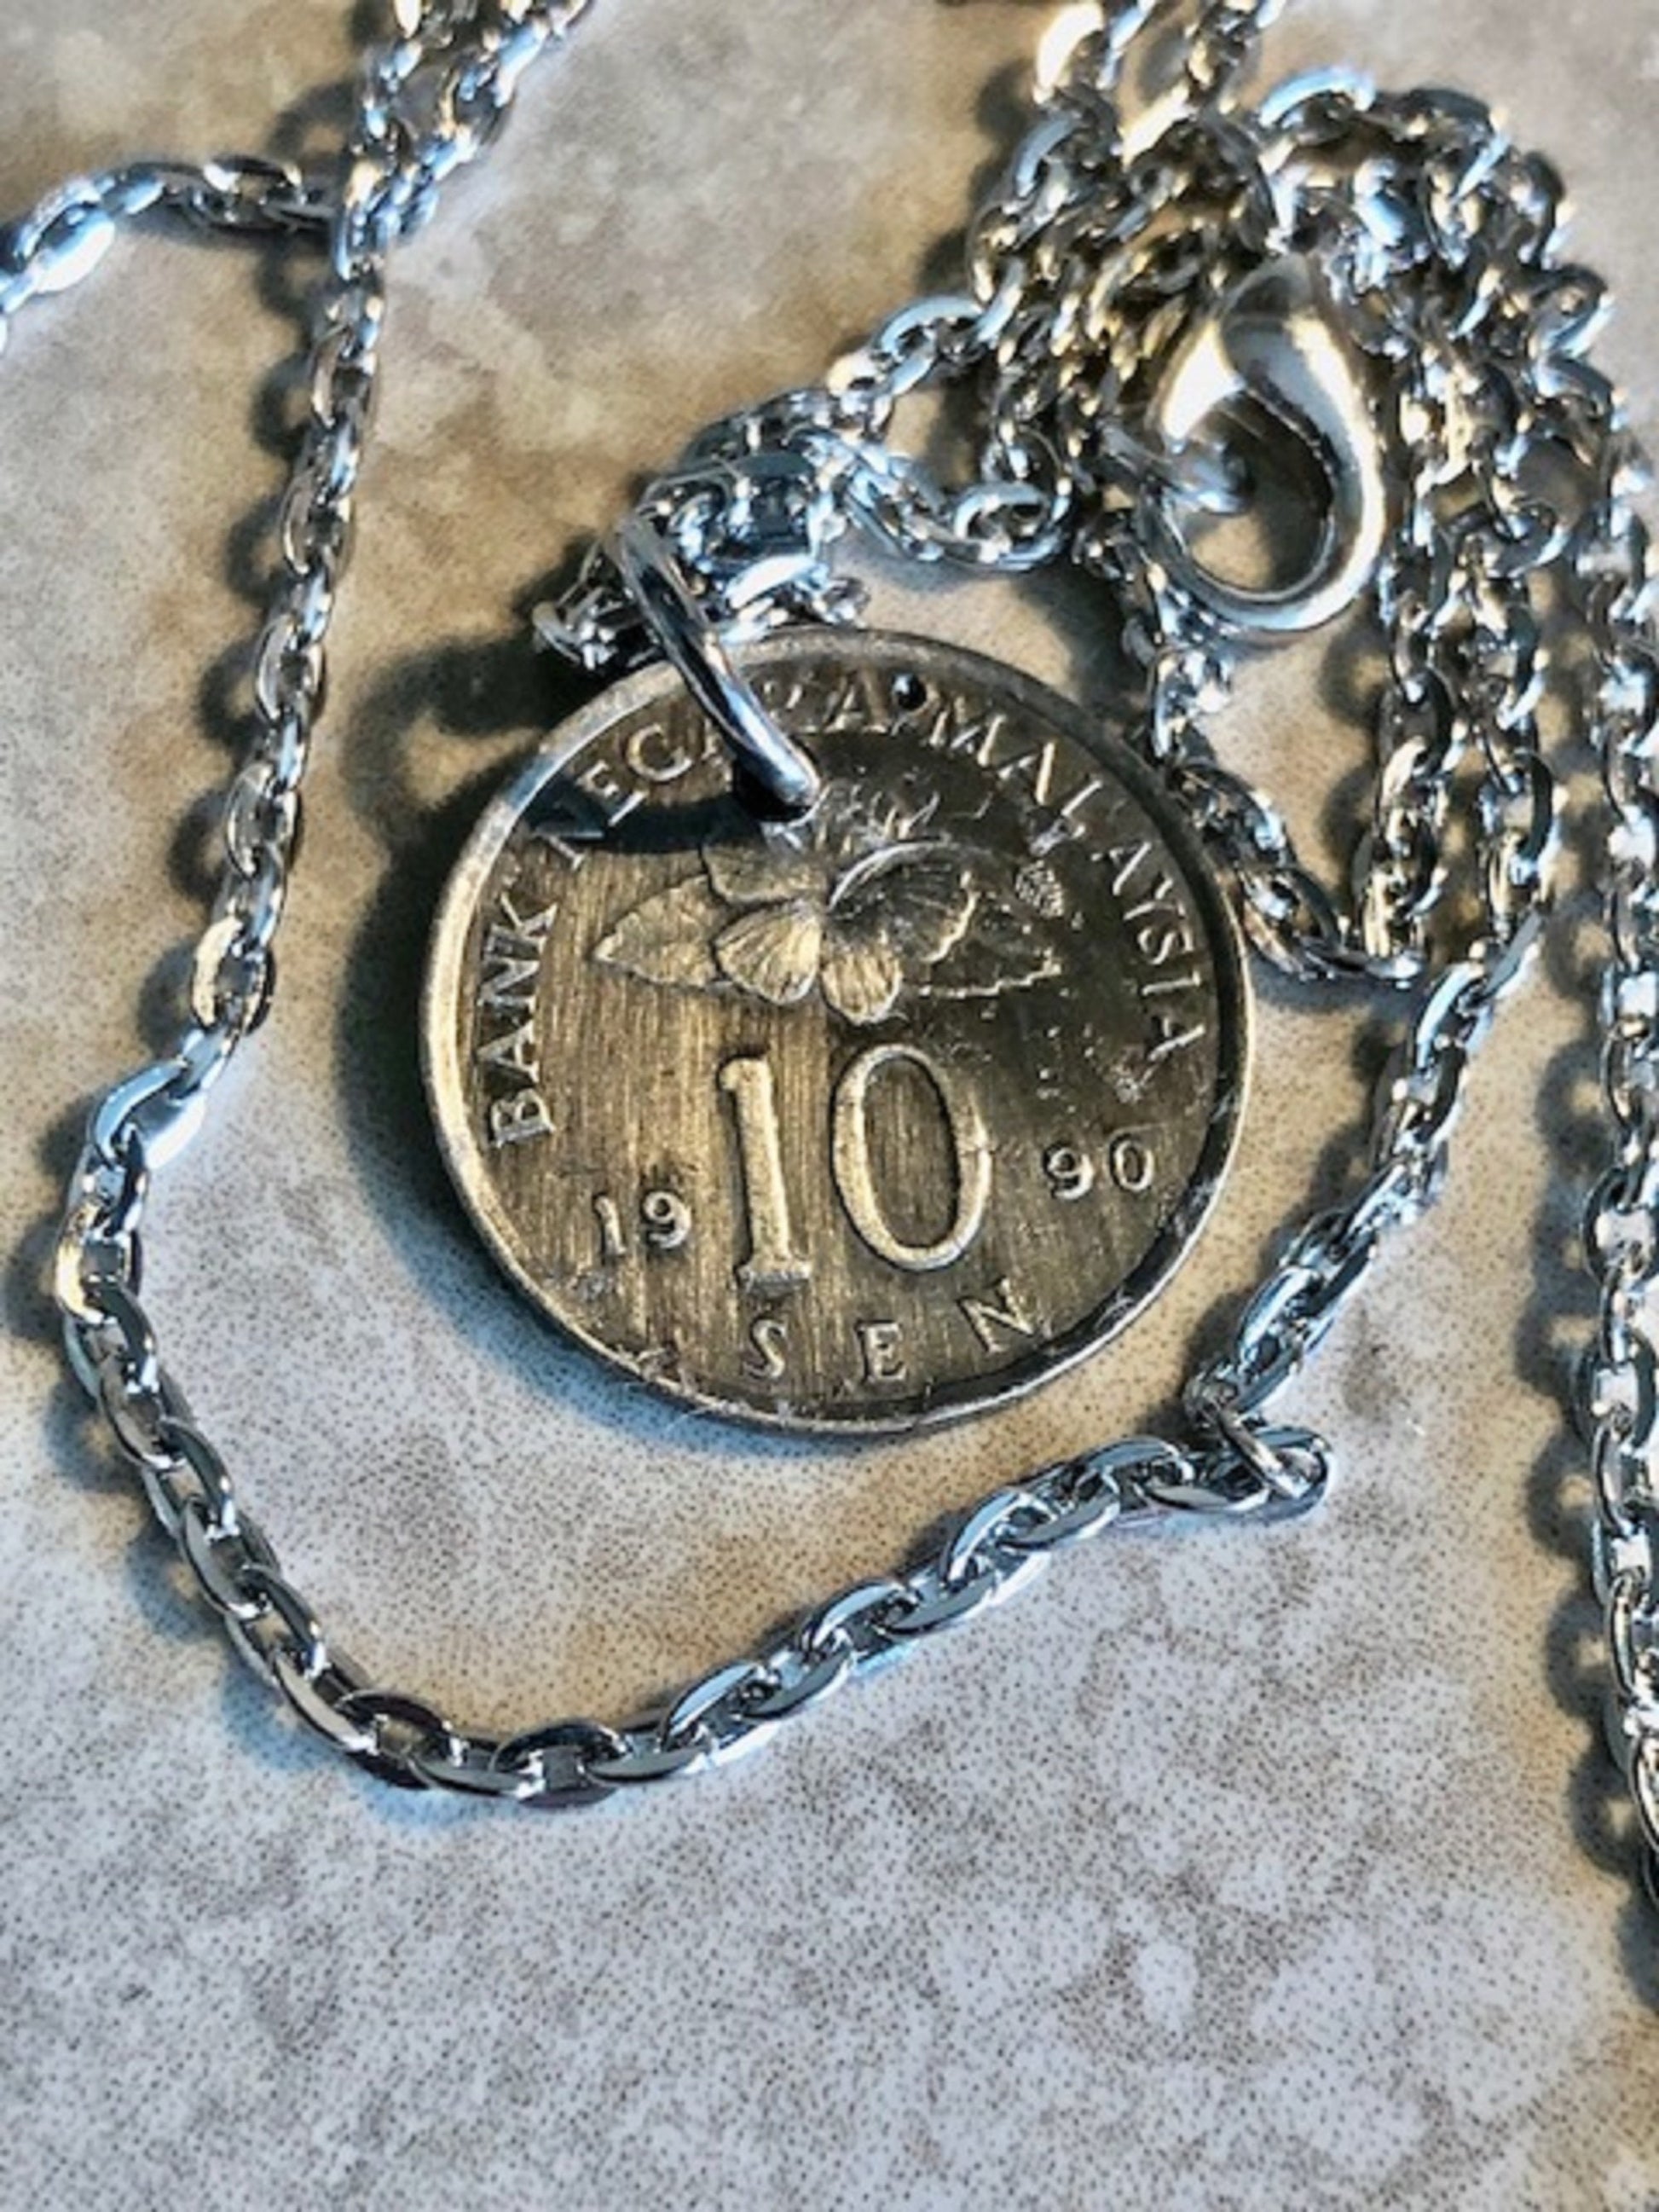 Malaysia Coin 10 Sen Pendant Necklace Custom Made Vintage Malaysian Jewelry Rare coins - Coin Enthusiast - Fashion Accessory